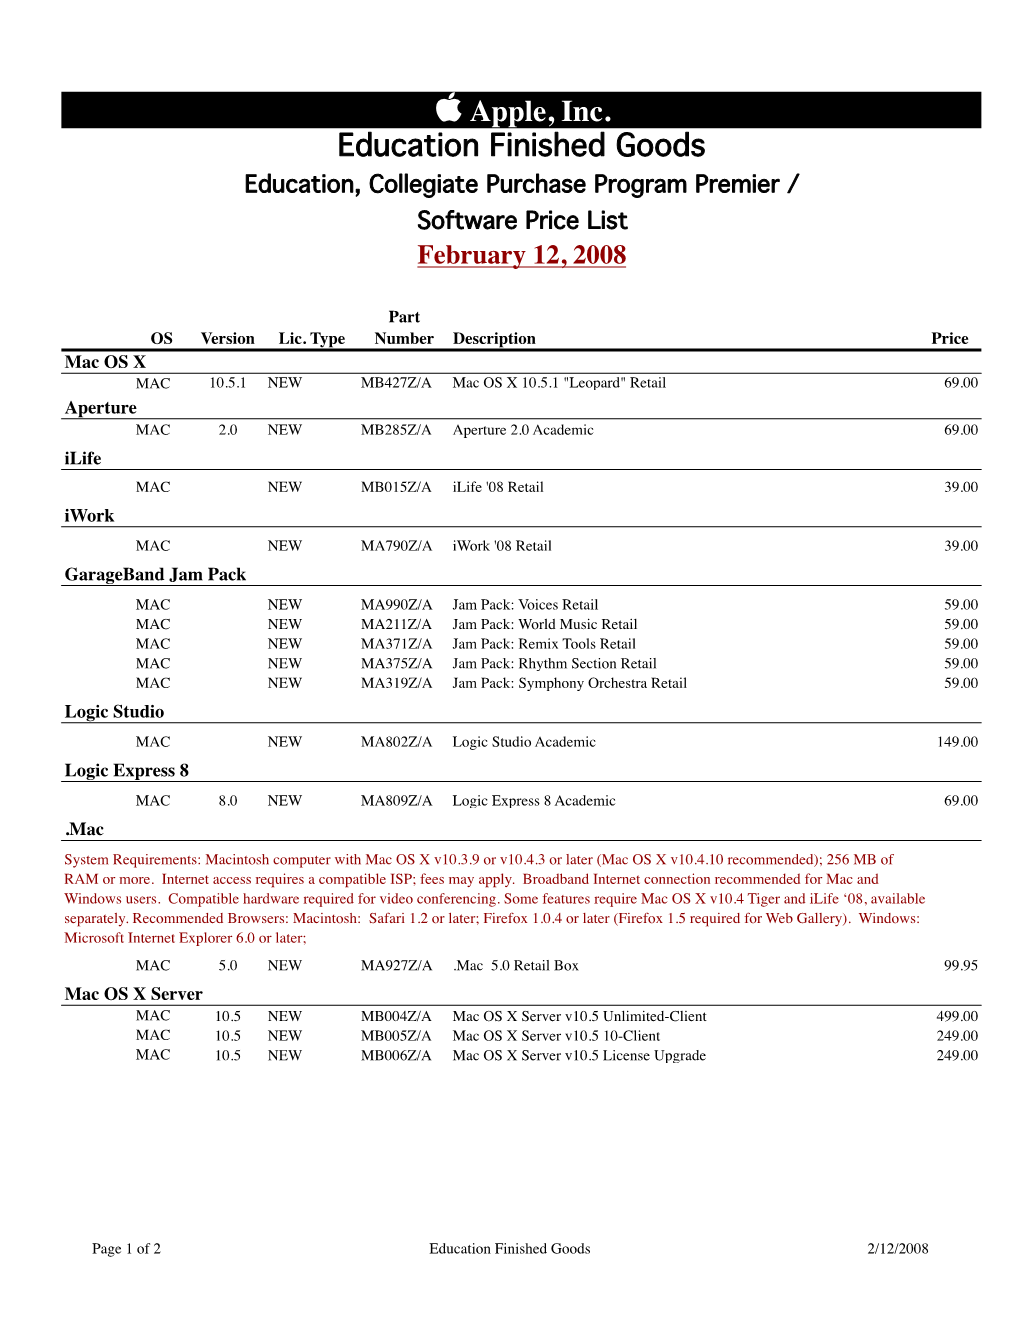 Apple, Inc. Education Finished Goods Education, Collegiate Purchase Program Premier / Software Price List February 12, 2008